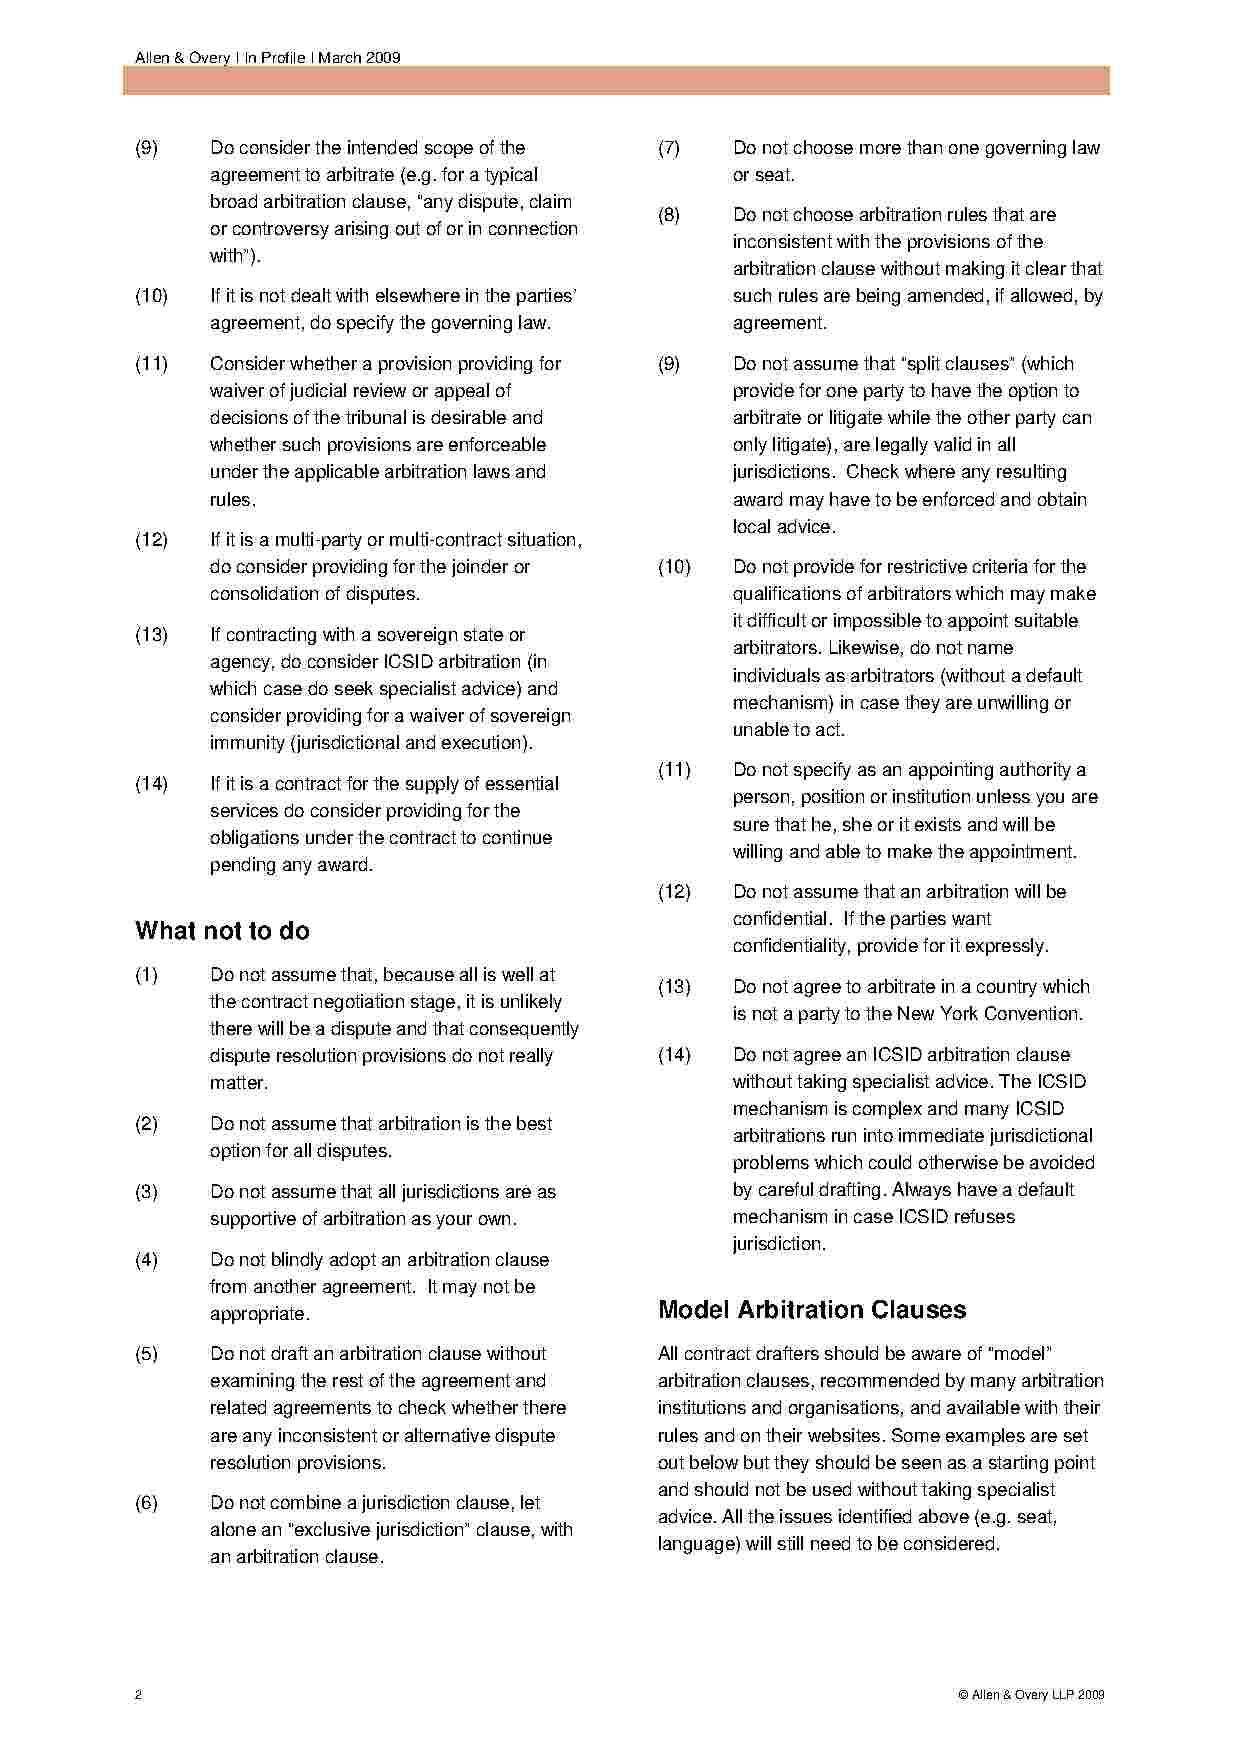 Physician Patient Arbitration Agreement Download Arbitration Agreement Style 16 Template For Free At